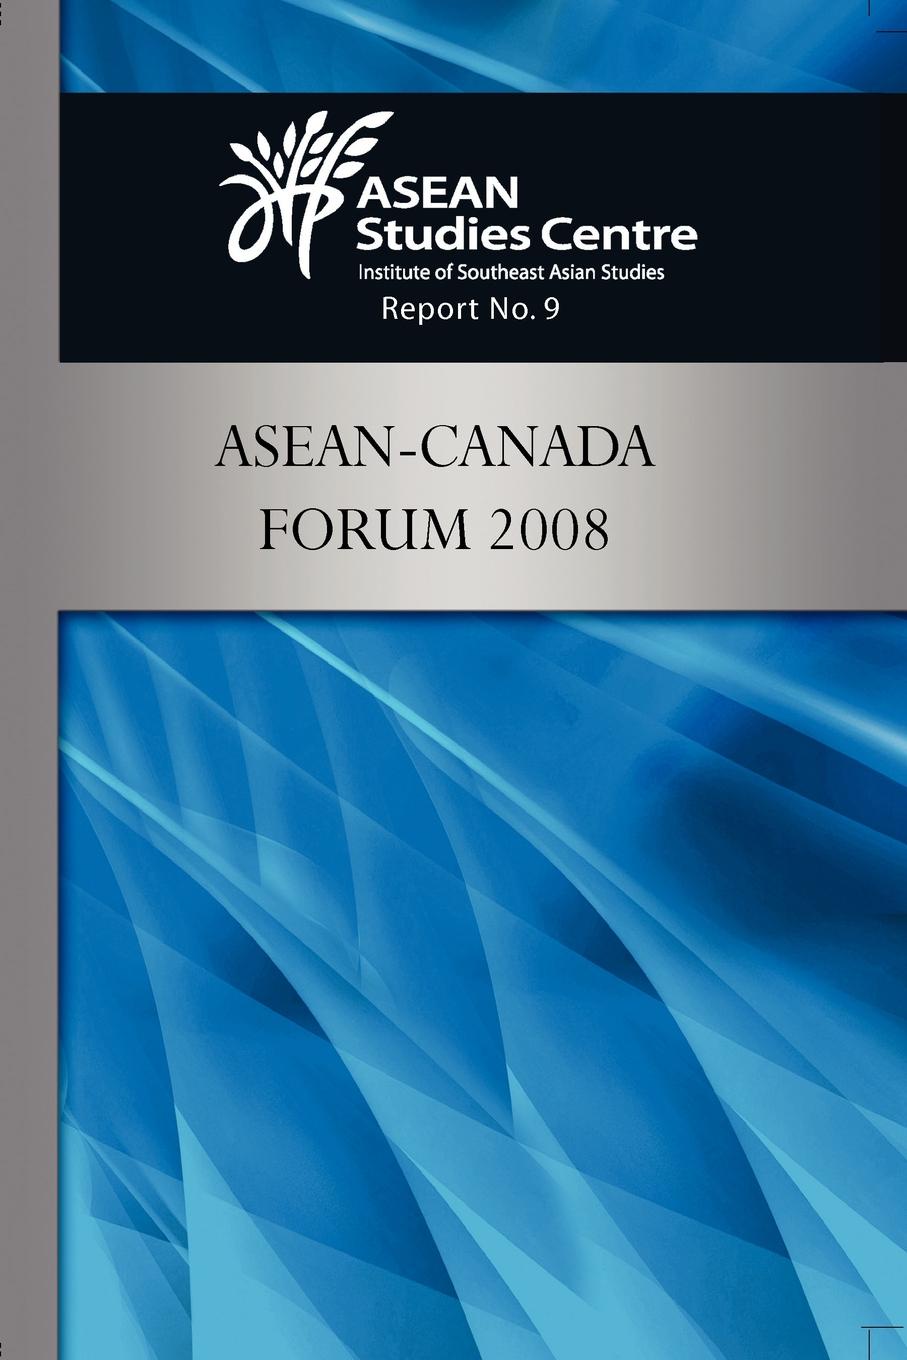 The Global Economic Crisis. Implications for ASEAN